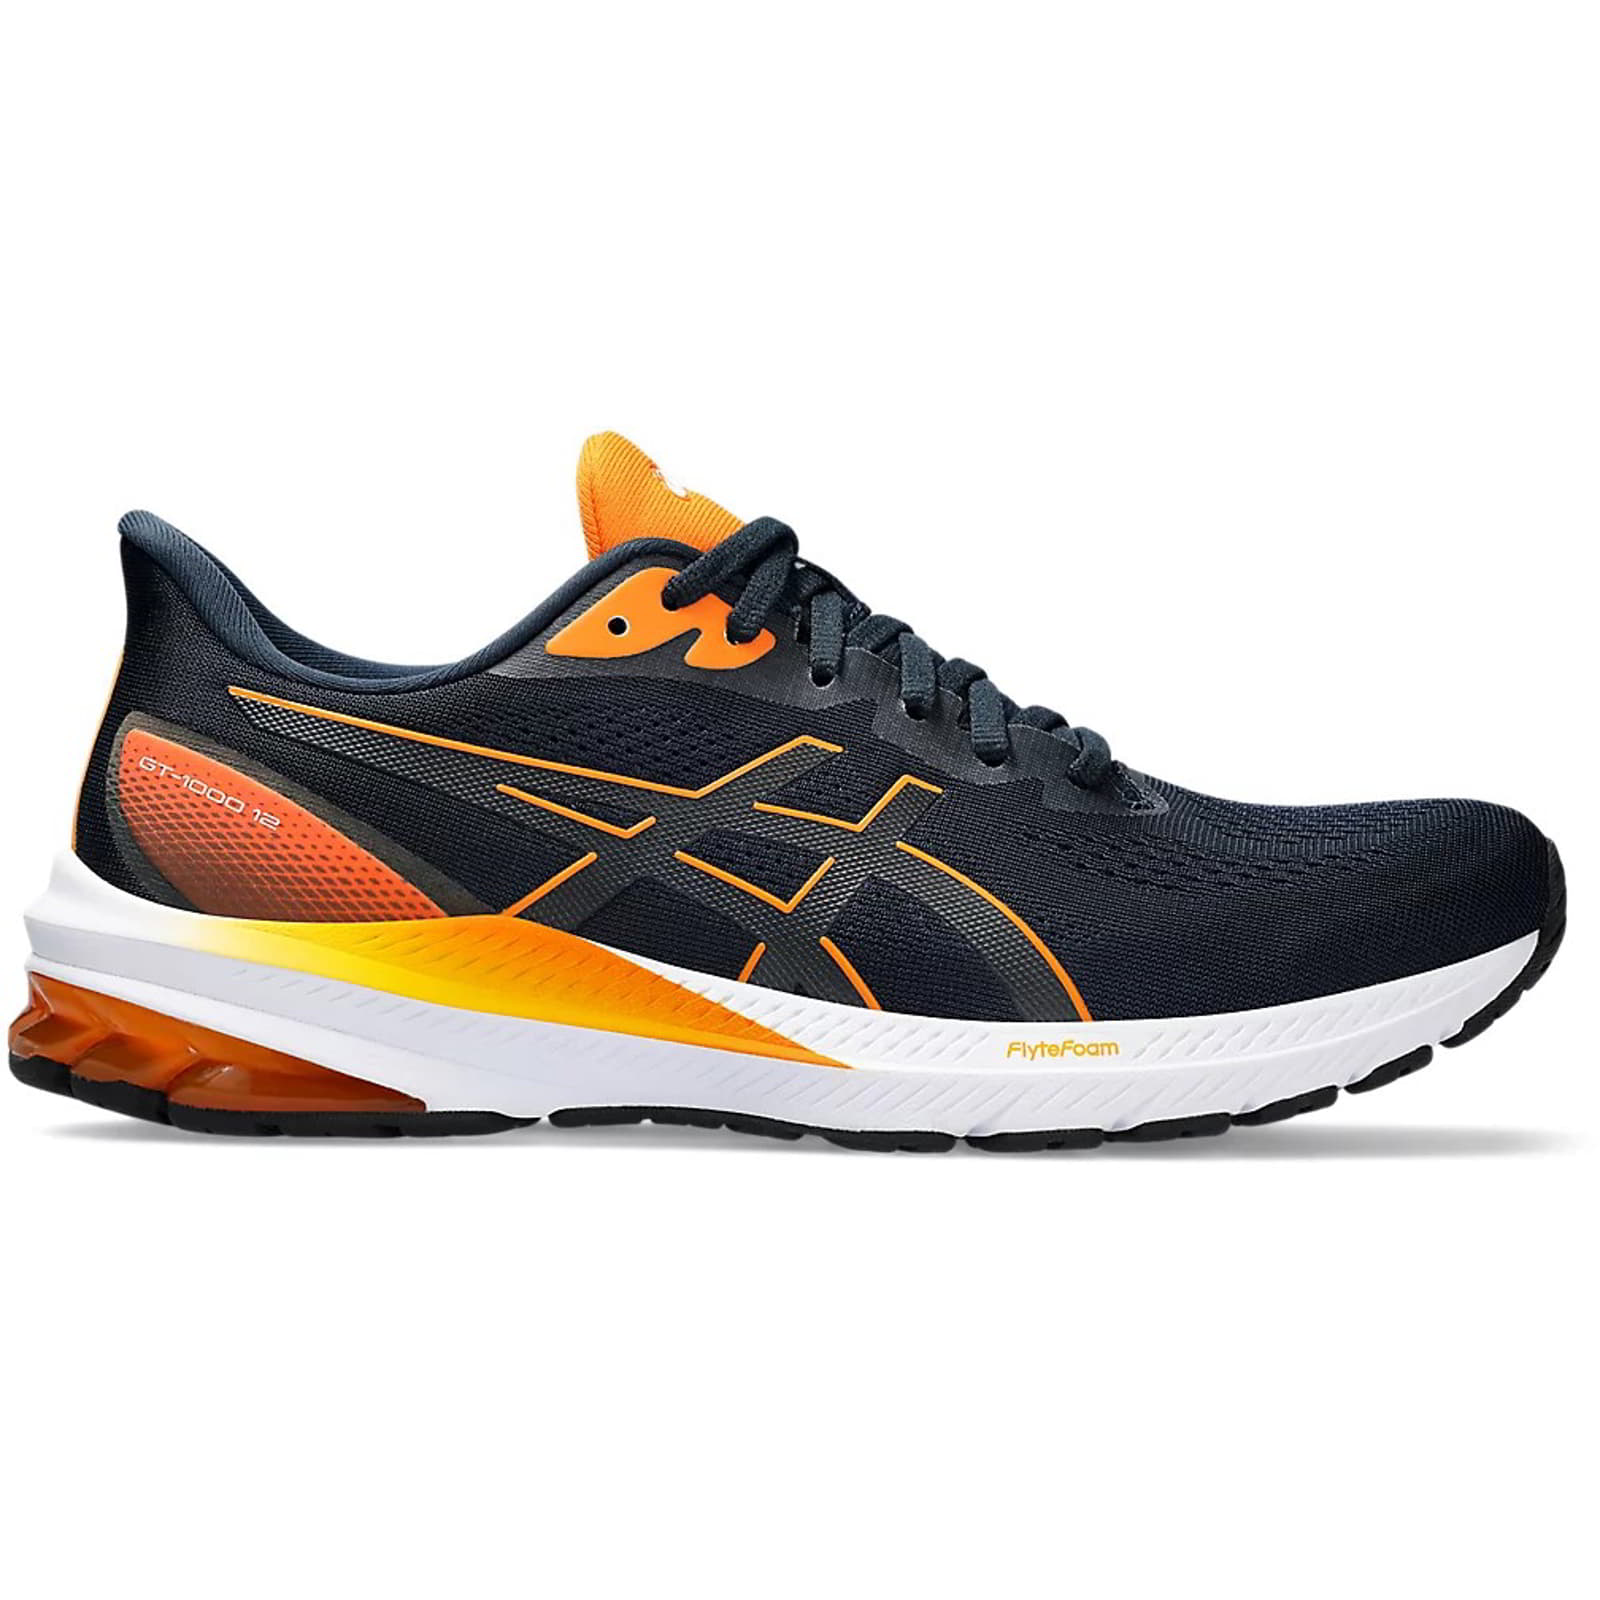 Asics Men's GT-1000 12 Running Shoes Trainers - UK 9